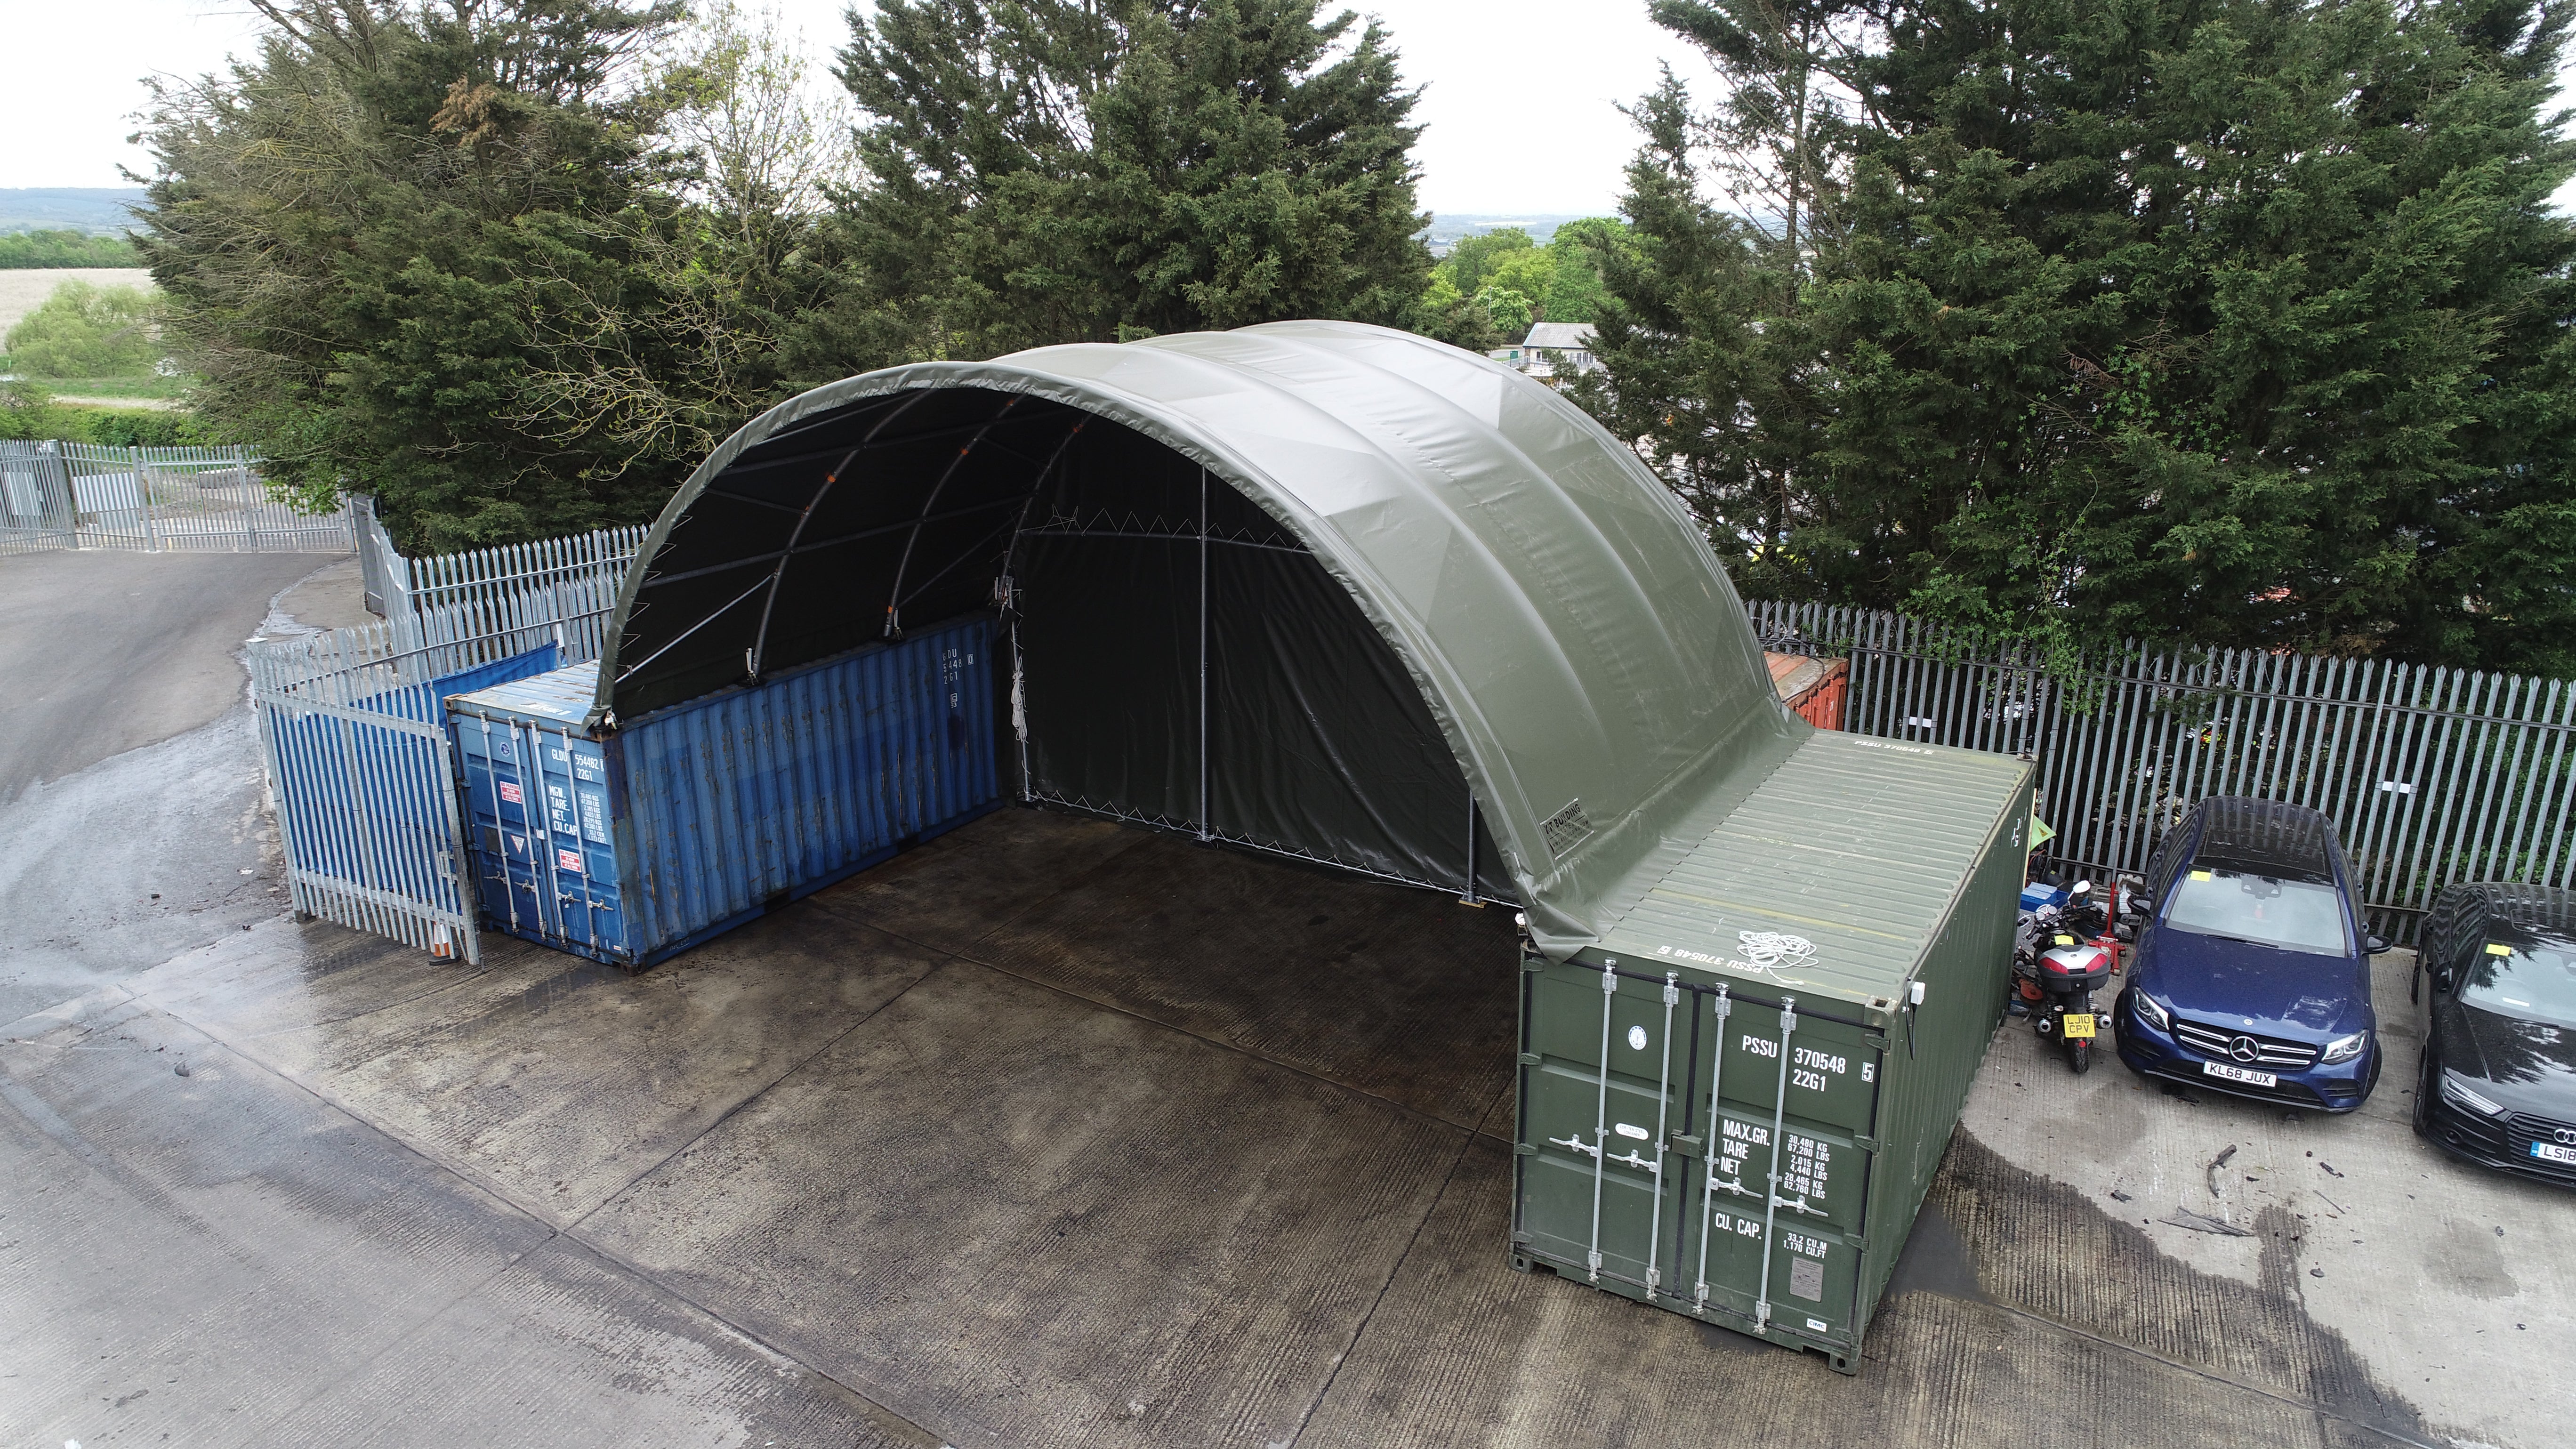 Container Shelter - 26ft x 20ft x 10ft (8m x 6m x 3m)